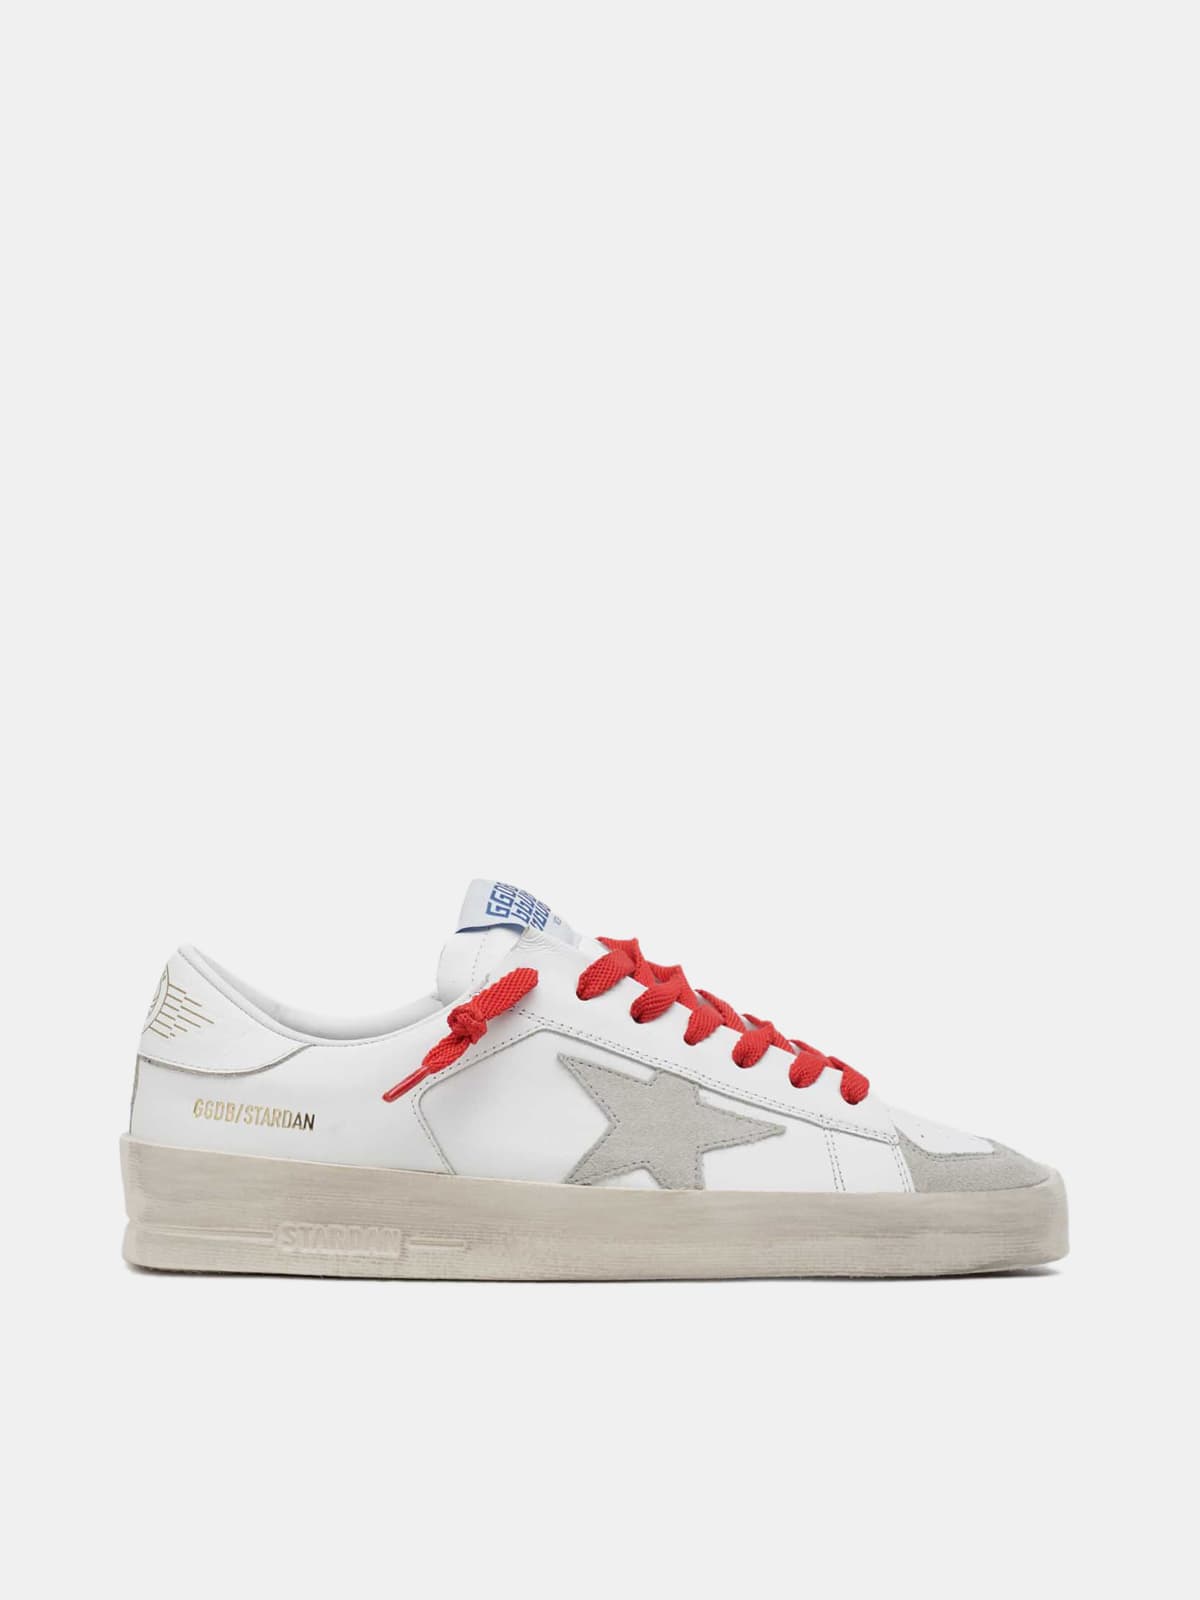 Stardan Sneakers in total white leather with suede inserts and contrasting  red laces | Golden Goose